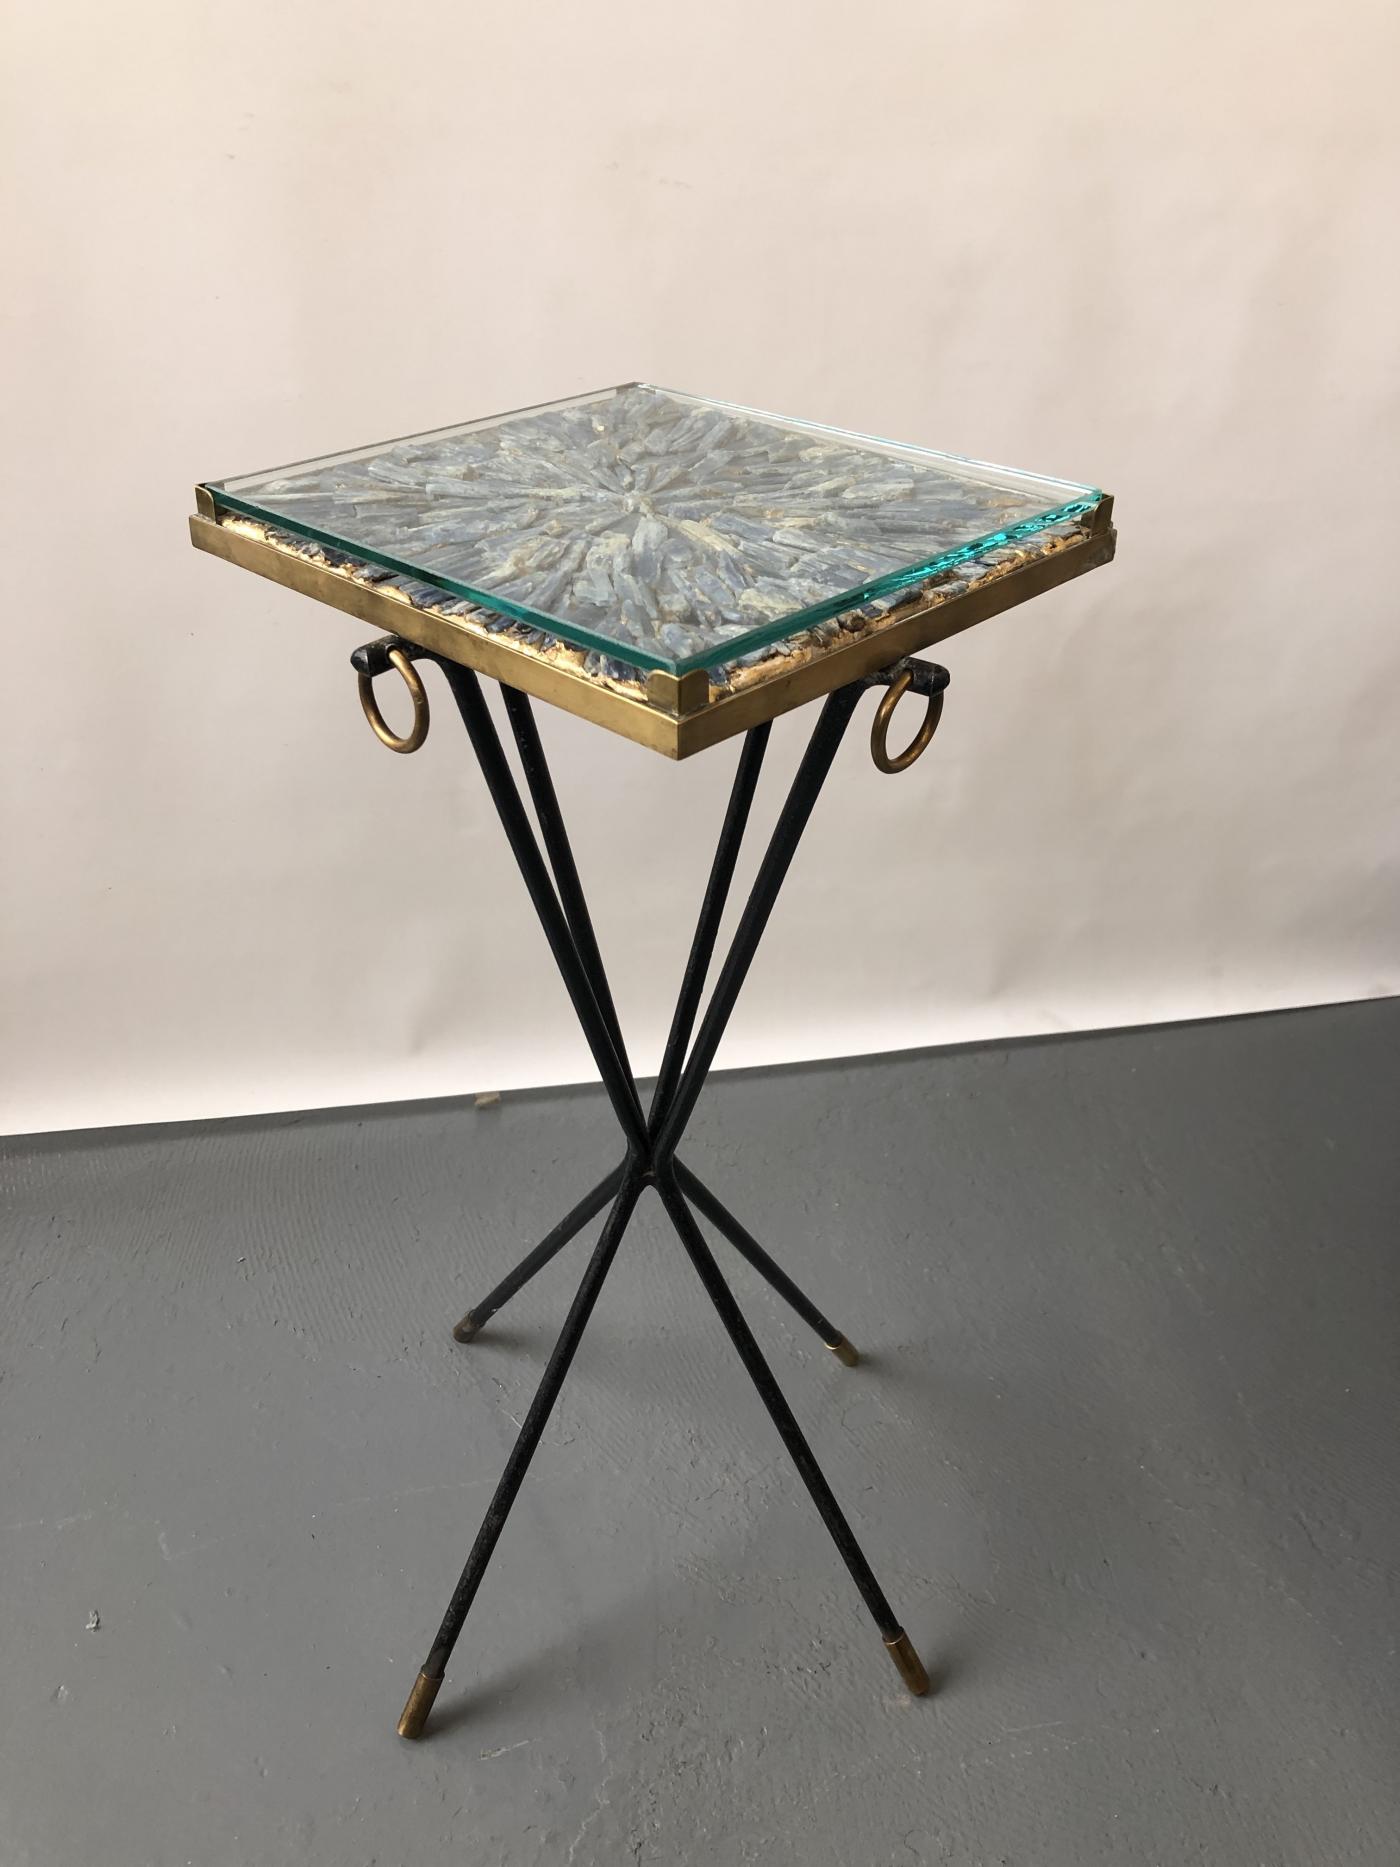 Italian side table, bronze details supporting a blue Kyantine stone top